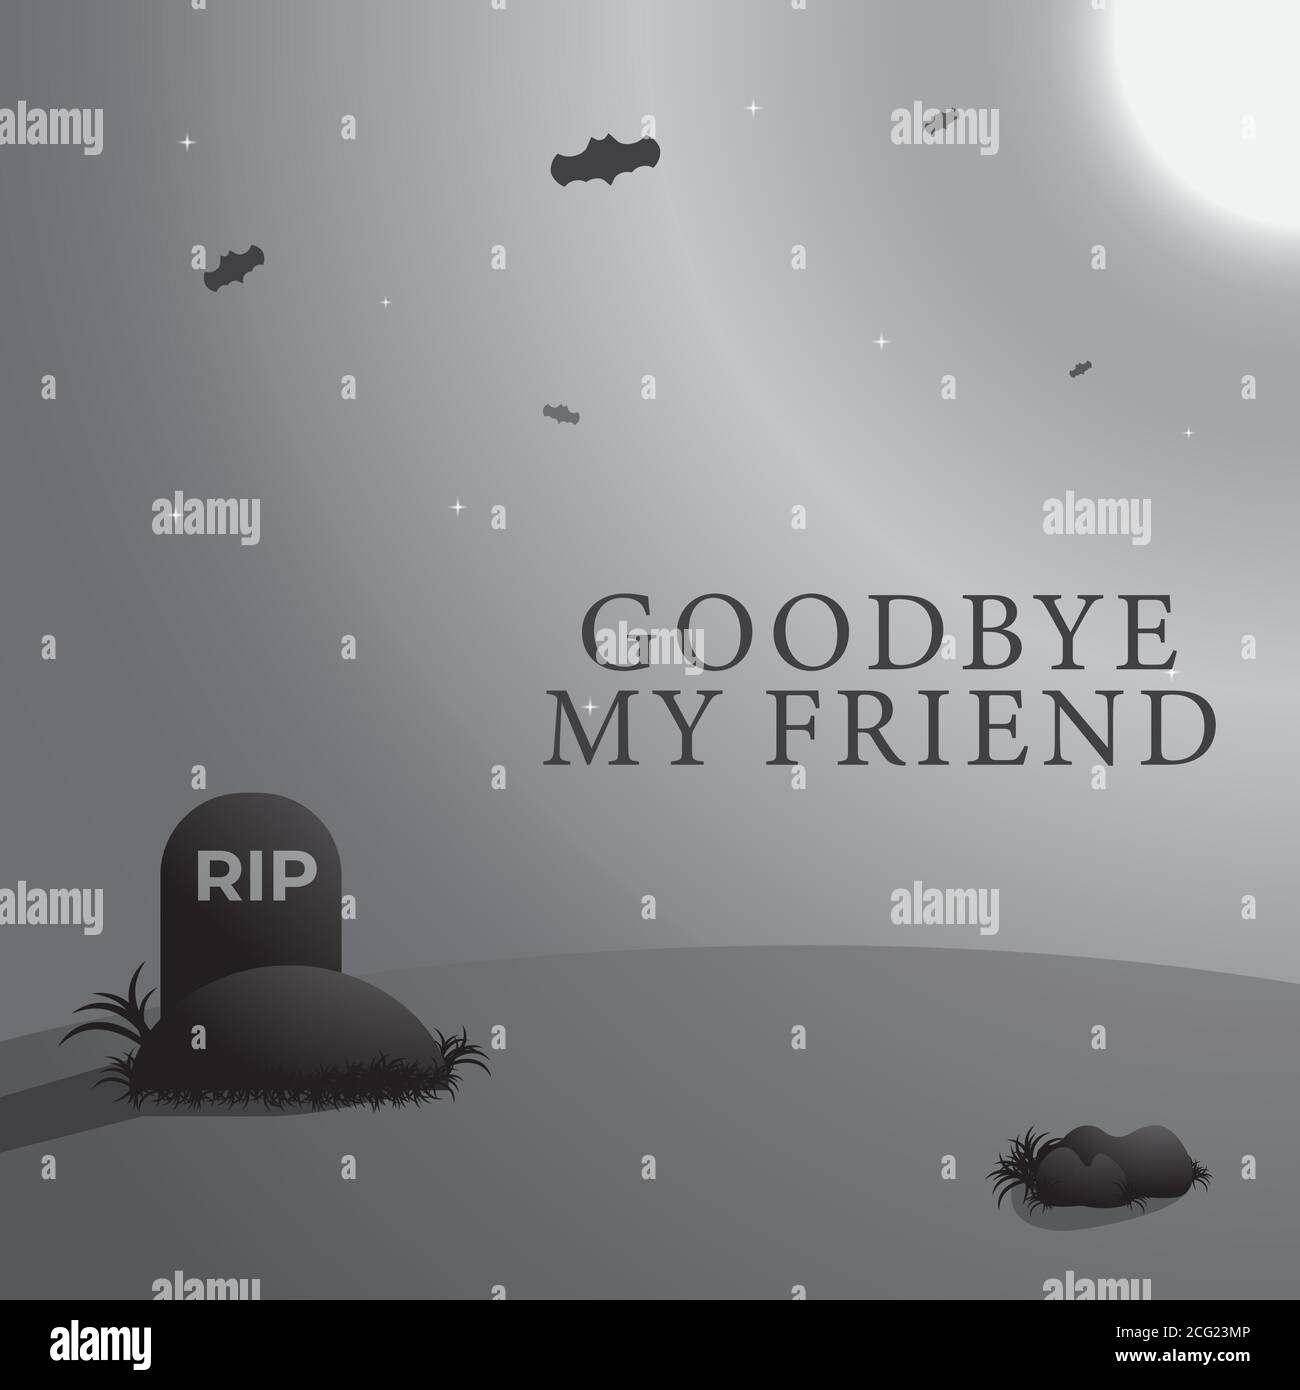 Goodbye My Friend, Rest In Peace Greeting Card Design Template. Graves And Bats In The Moonlight Vector Illstration. Monochrome, Black And White Color Stock Vector